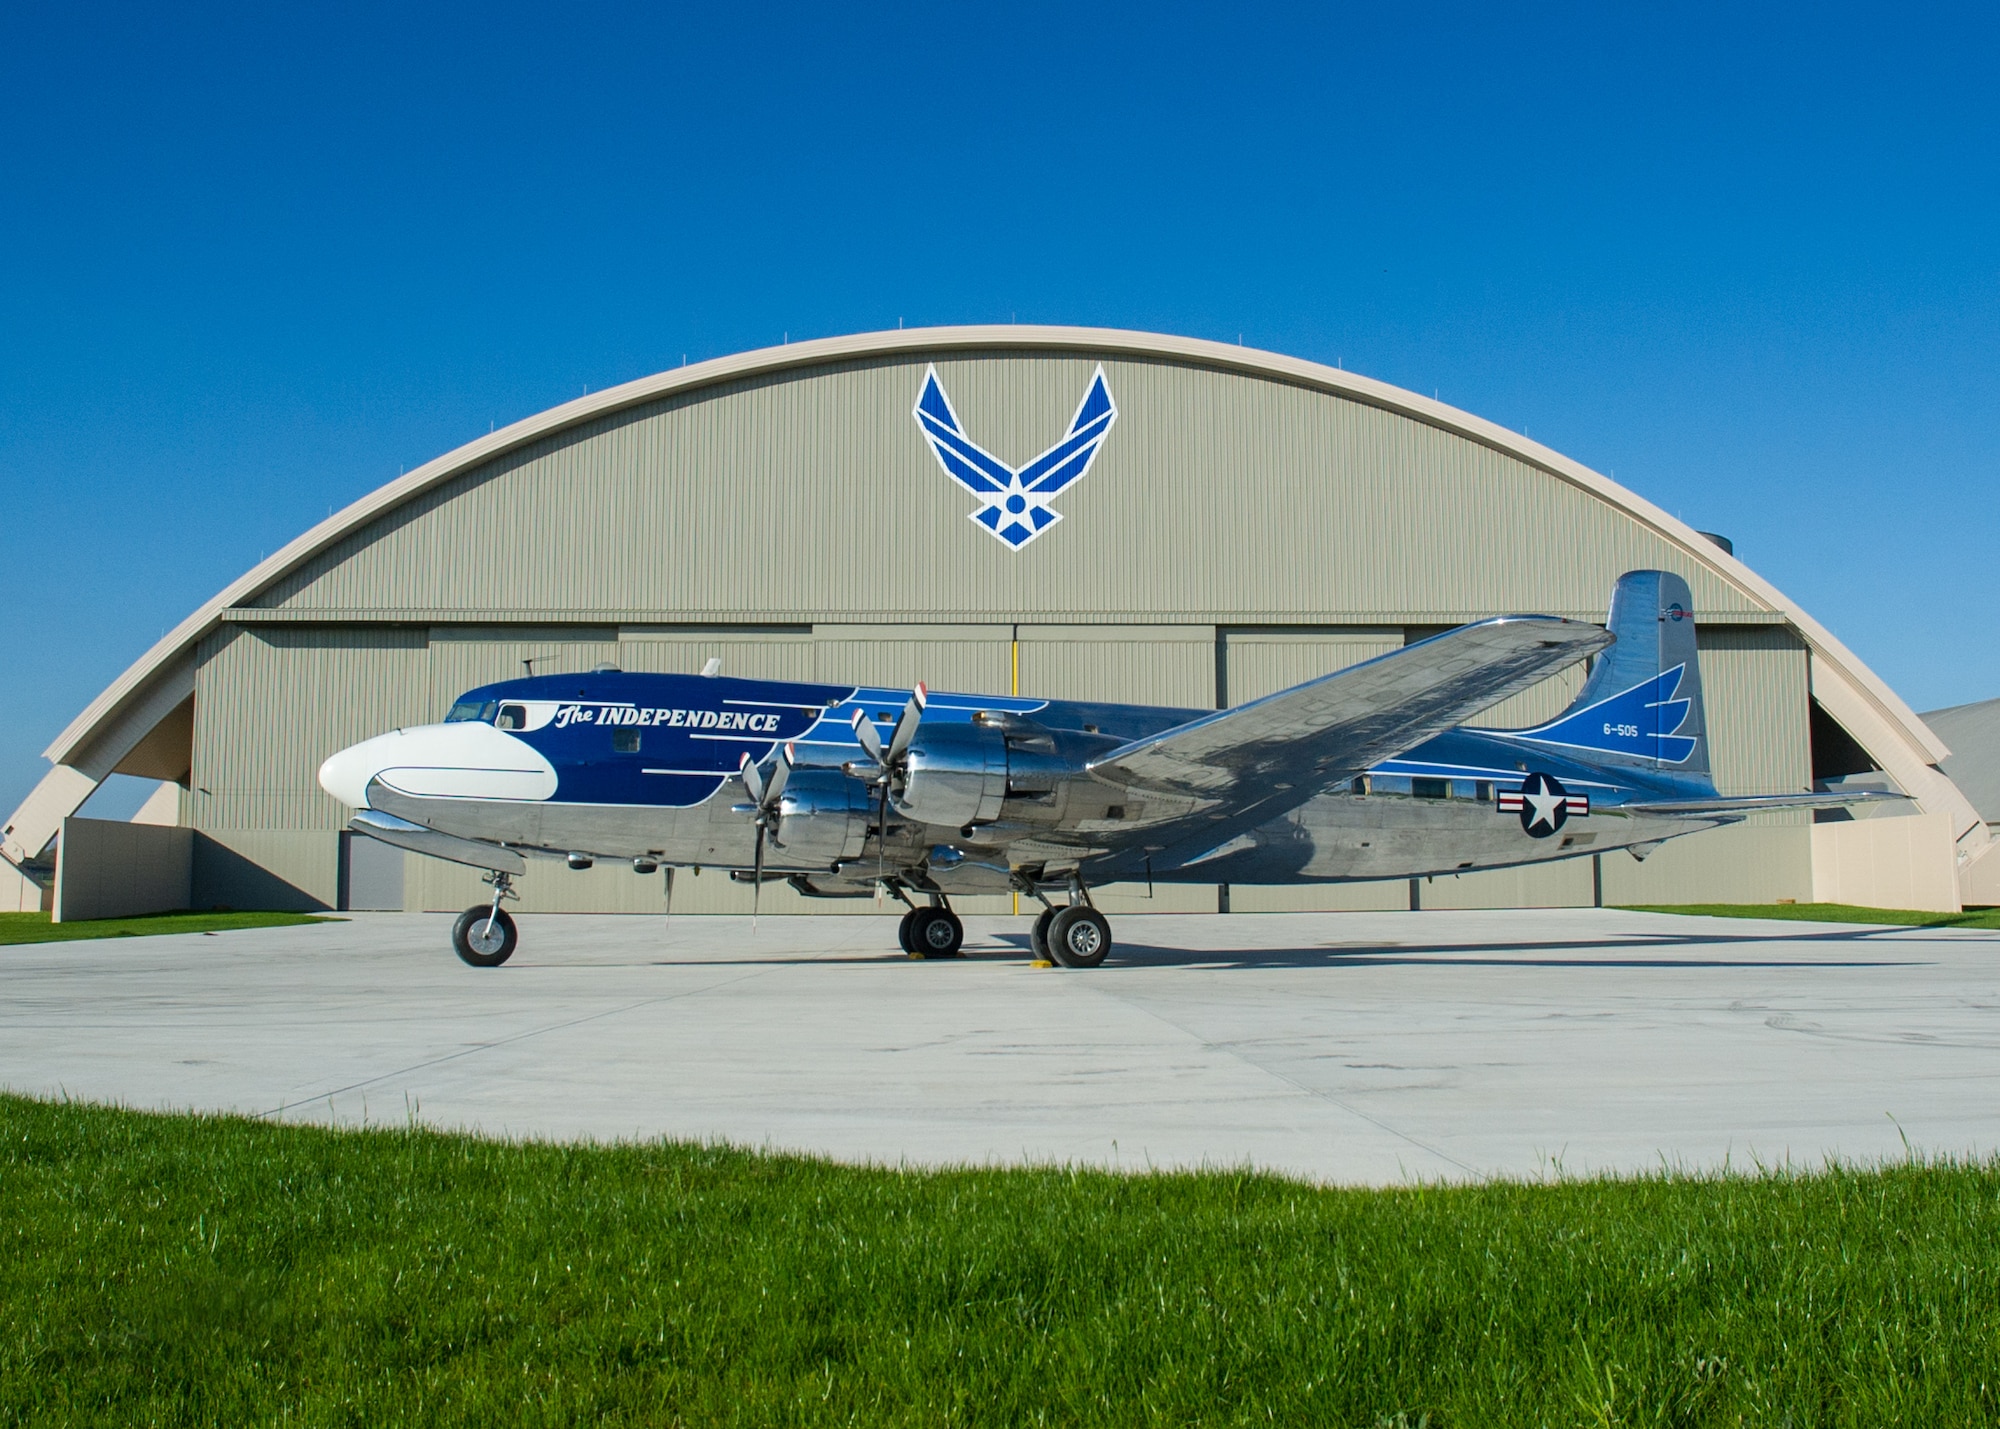 DAYTON, Ohio -- The Douglas VC-118 “Independence” at the National Museum of the United States Air Force on April 23, 2016. This aircraft is one of ten Presidential aircraft in the collection. (U.S. Air Force photo by Ken LaRock) 